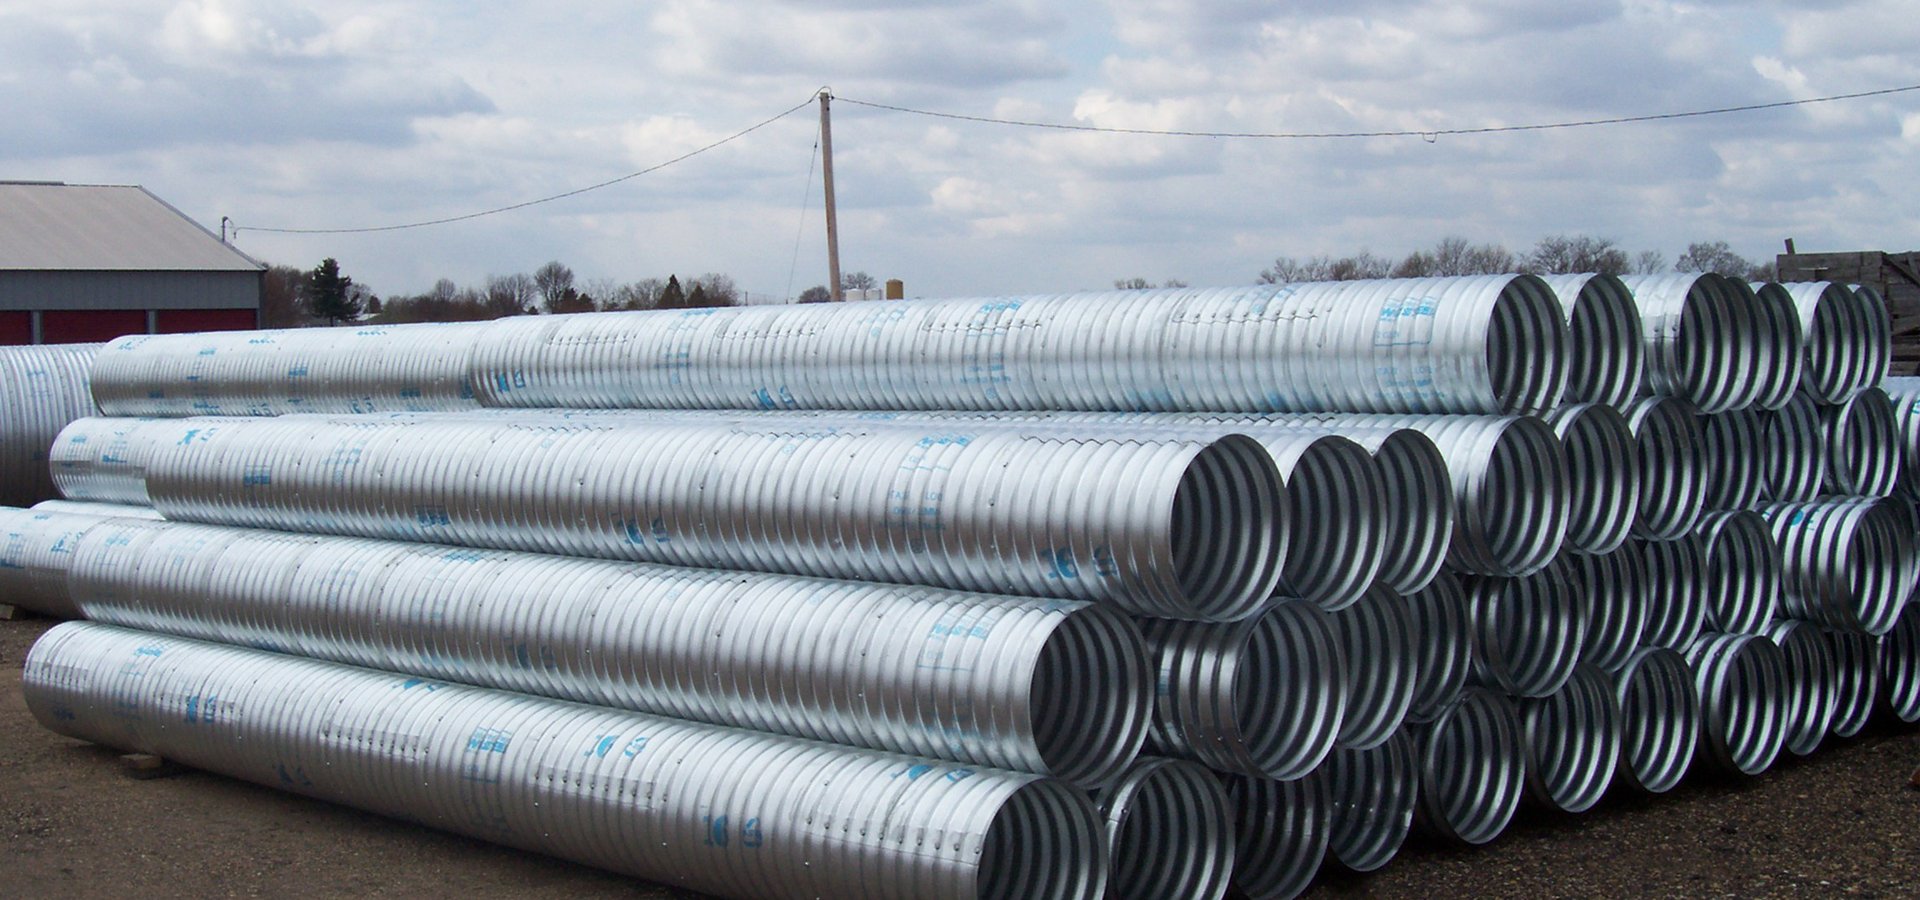 Corrugated metal pipe and plastic pipe sales TN